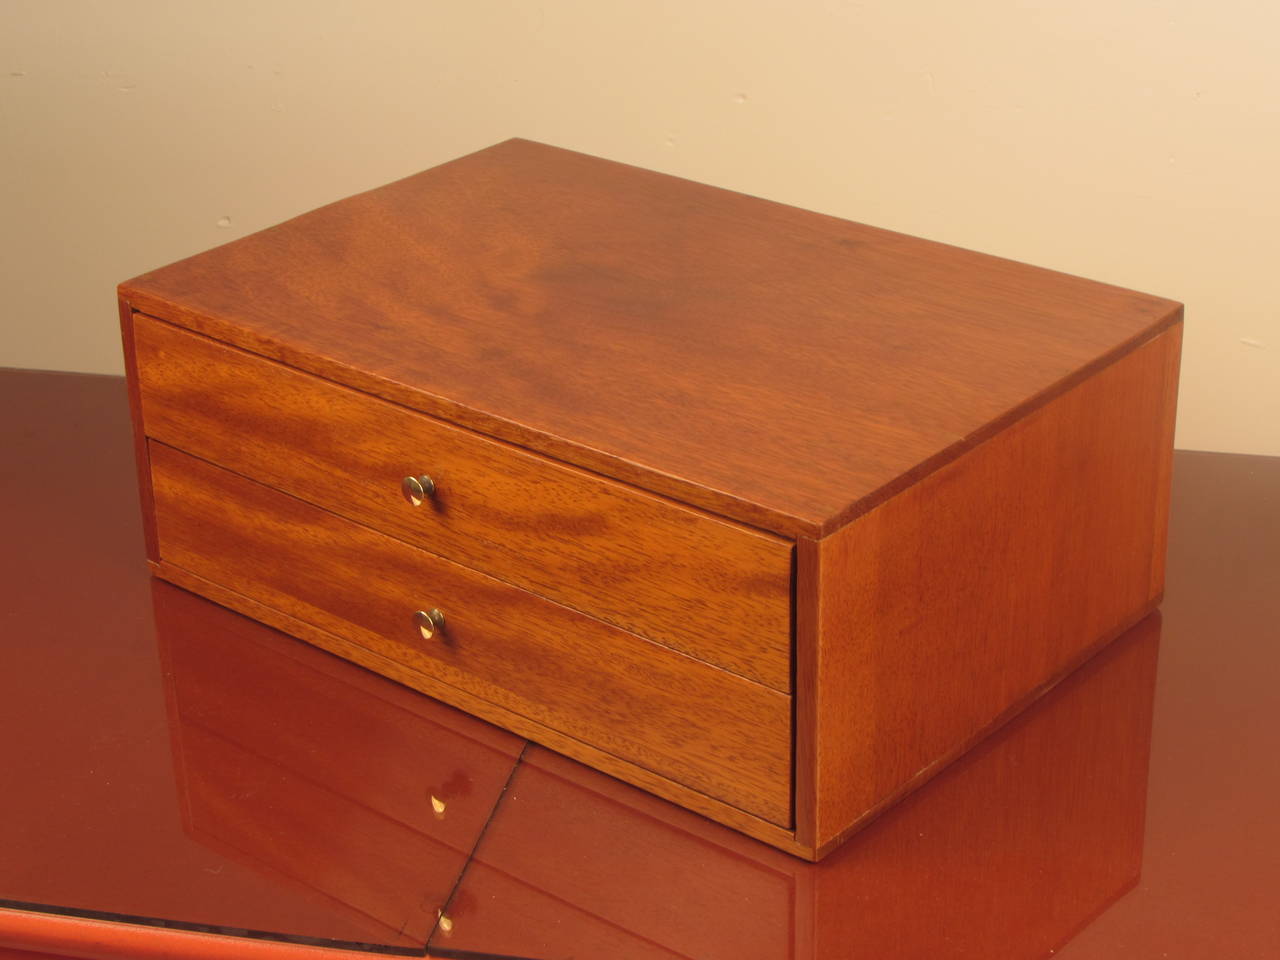 Lovely two drawer mahogany dresser box or jewelry box in the style of Paul McCobb. The drawer pulls are polished brass. This piece has been fully restored.